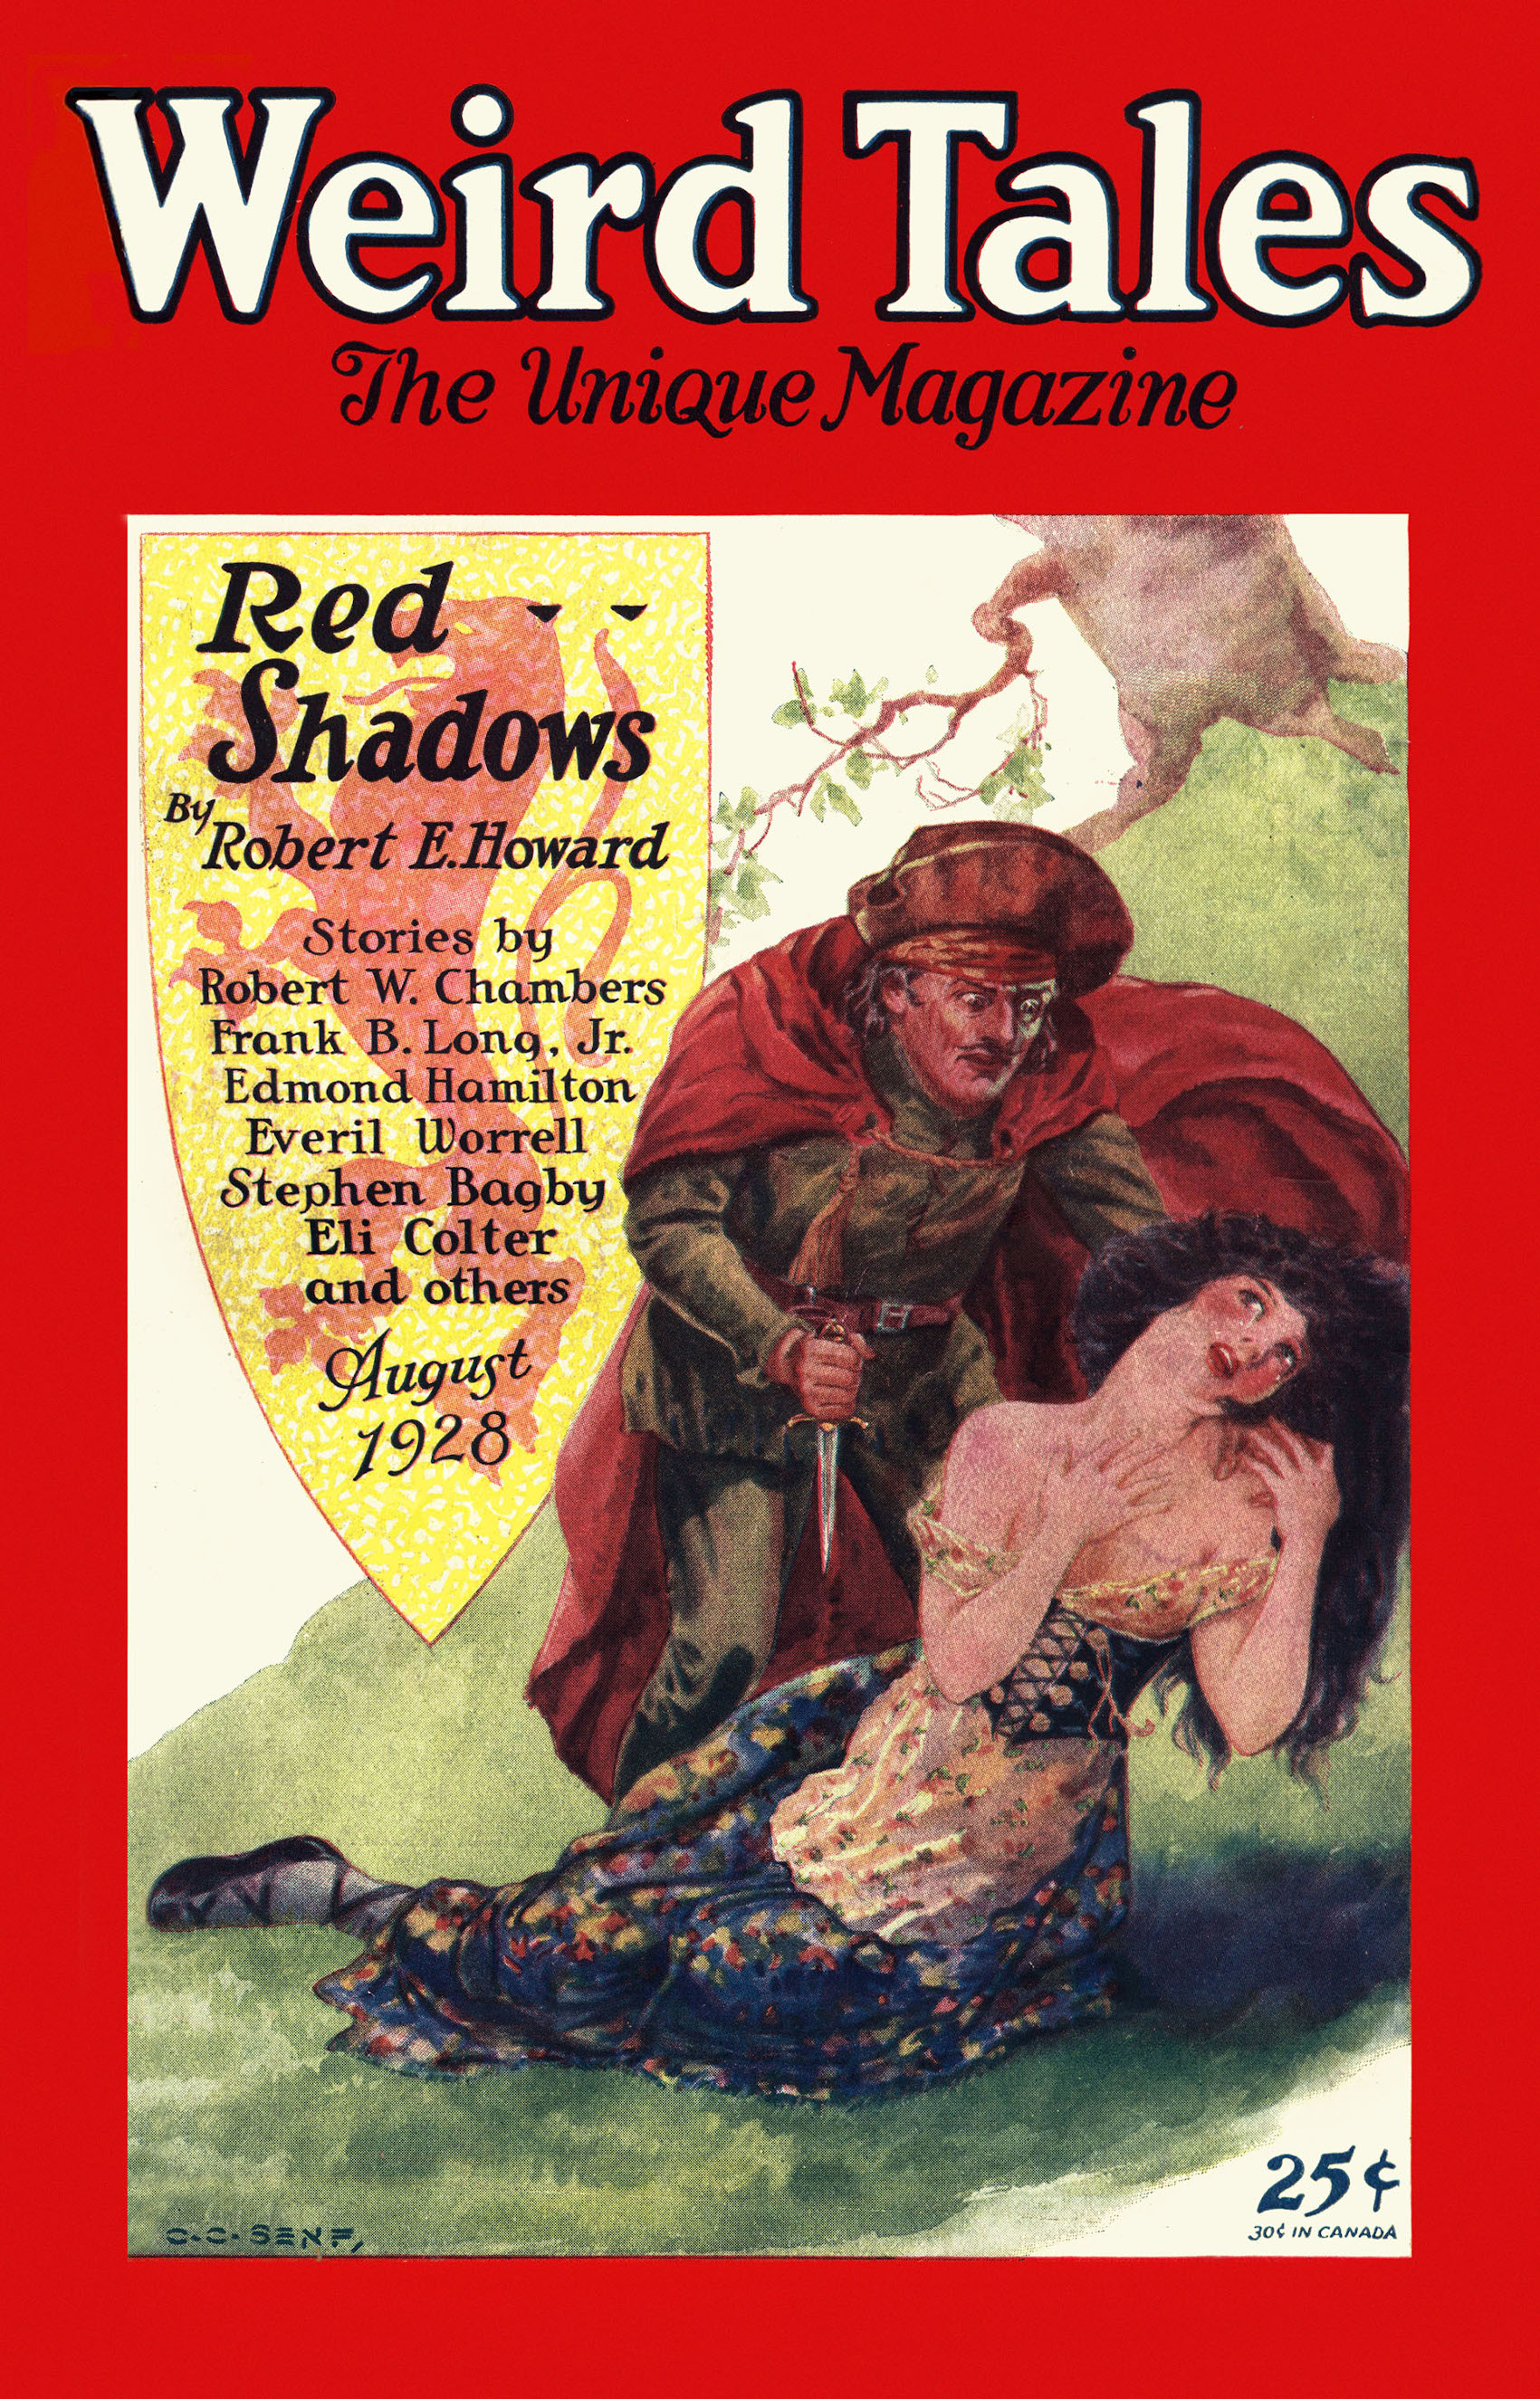 Red shadows